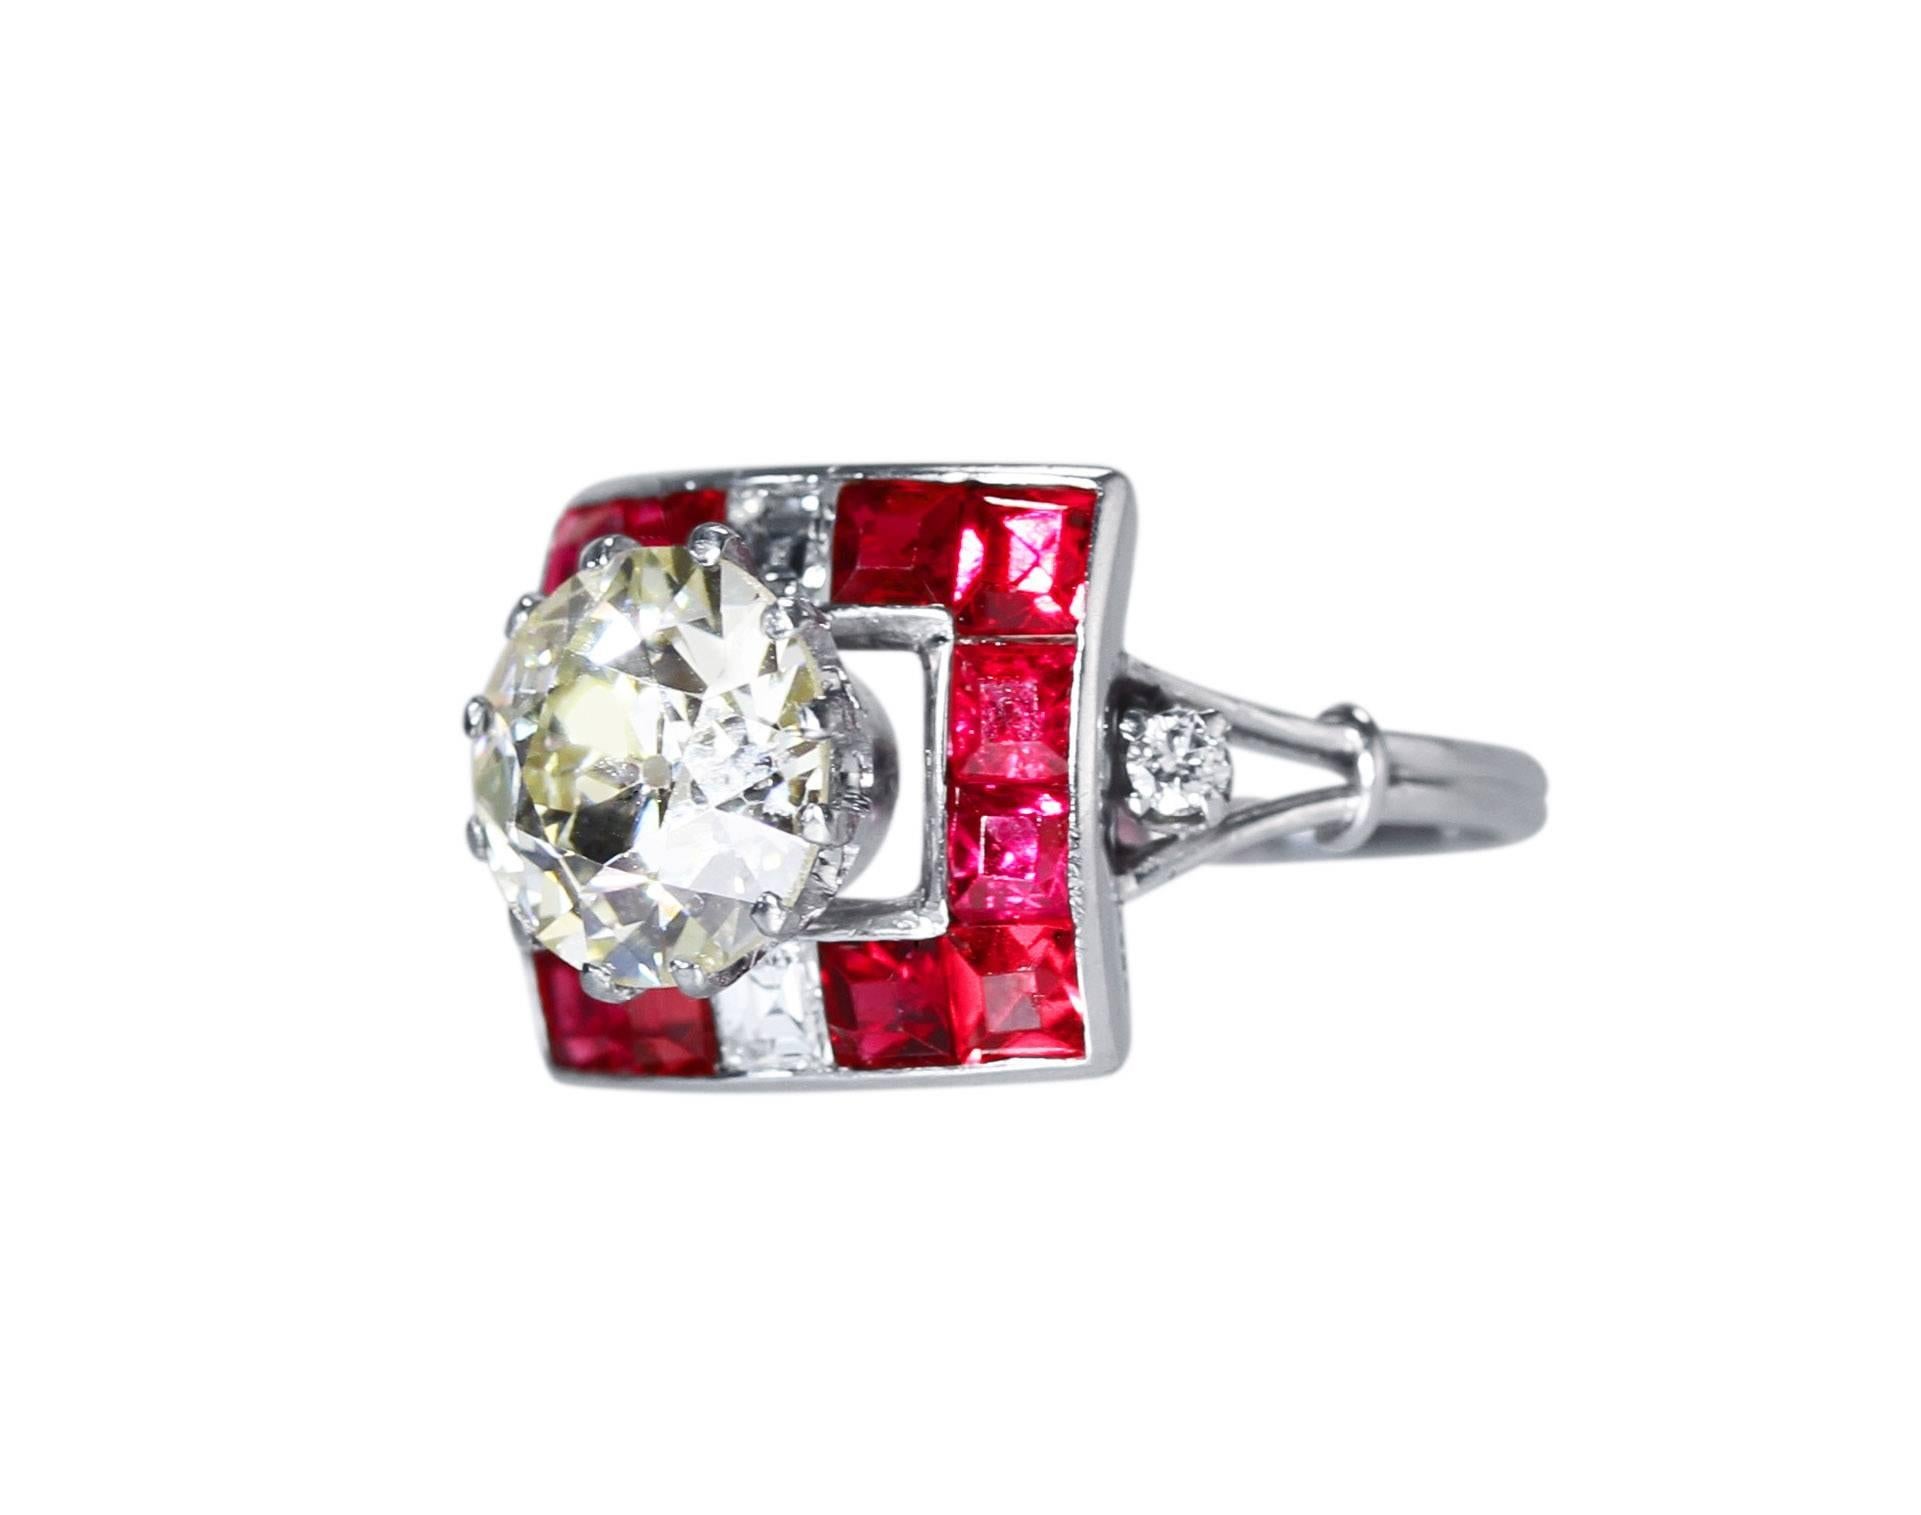 This lovely handmade platinum ring is from the Art Deco period. It has a beautiful look and charm featuring a near 3 carat old European-cut diamond within a square frame accented by 12 old square-cut natural red spinels, 2 asscher-cut  accent